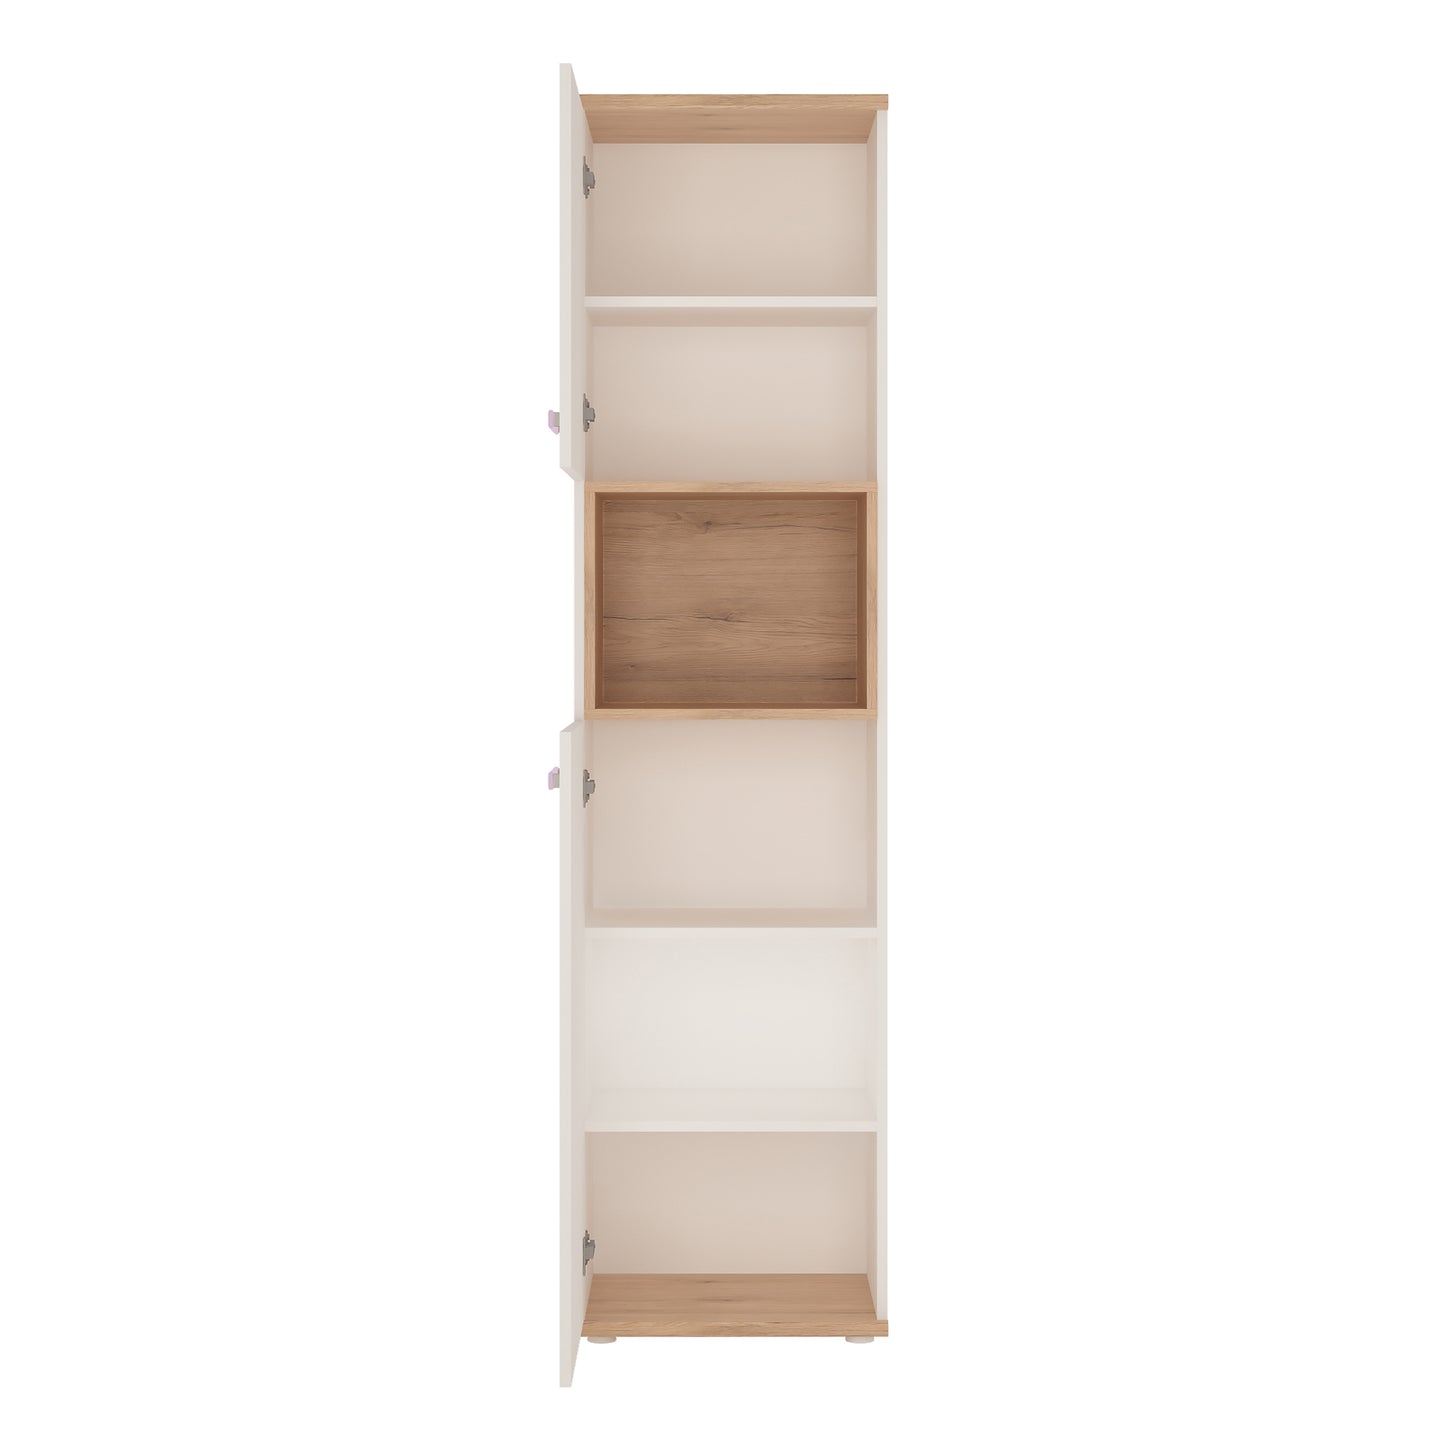 4Kids  Tall 2 Door Cabinet in Light Oak and white High Gloss (lilac handles)